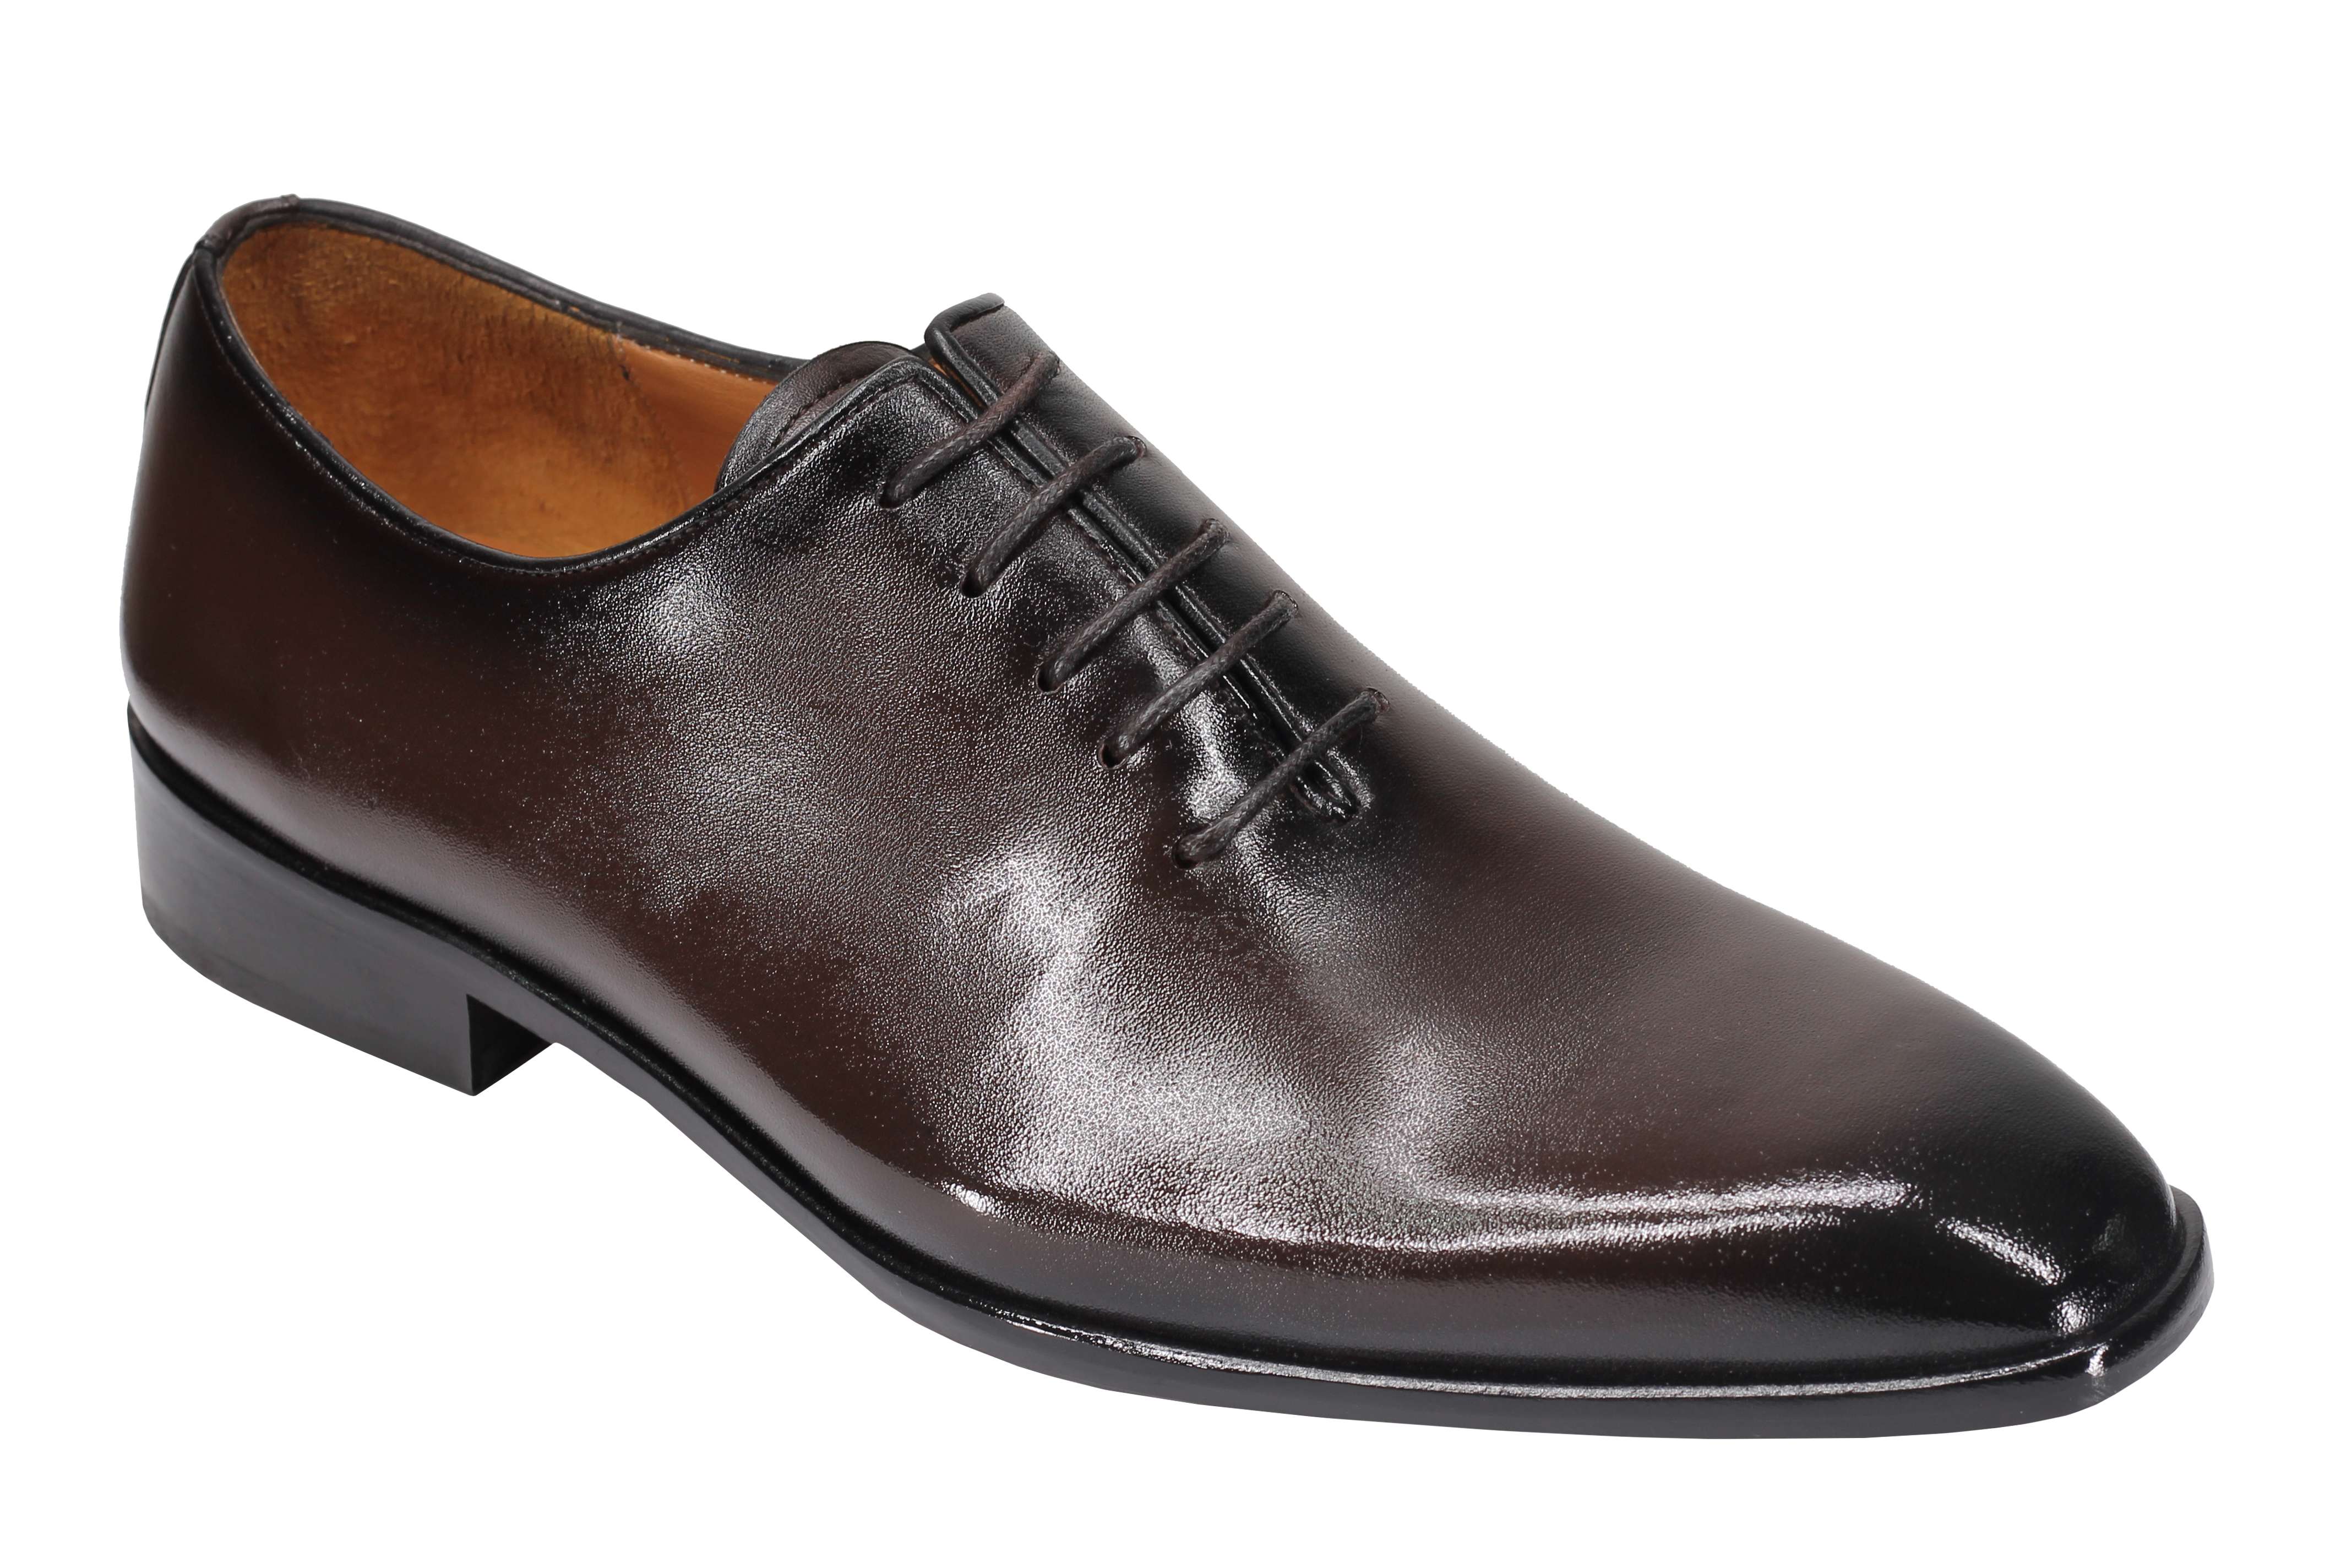 CALF LEATHER WHOLECUT OXFORD LACE UP SHOES IN BROWN